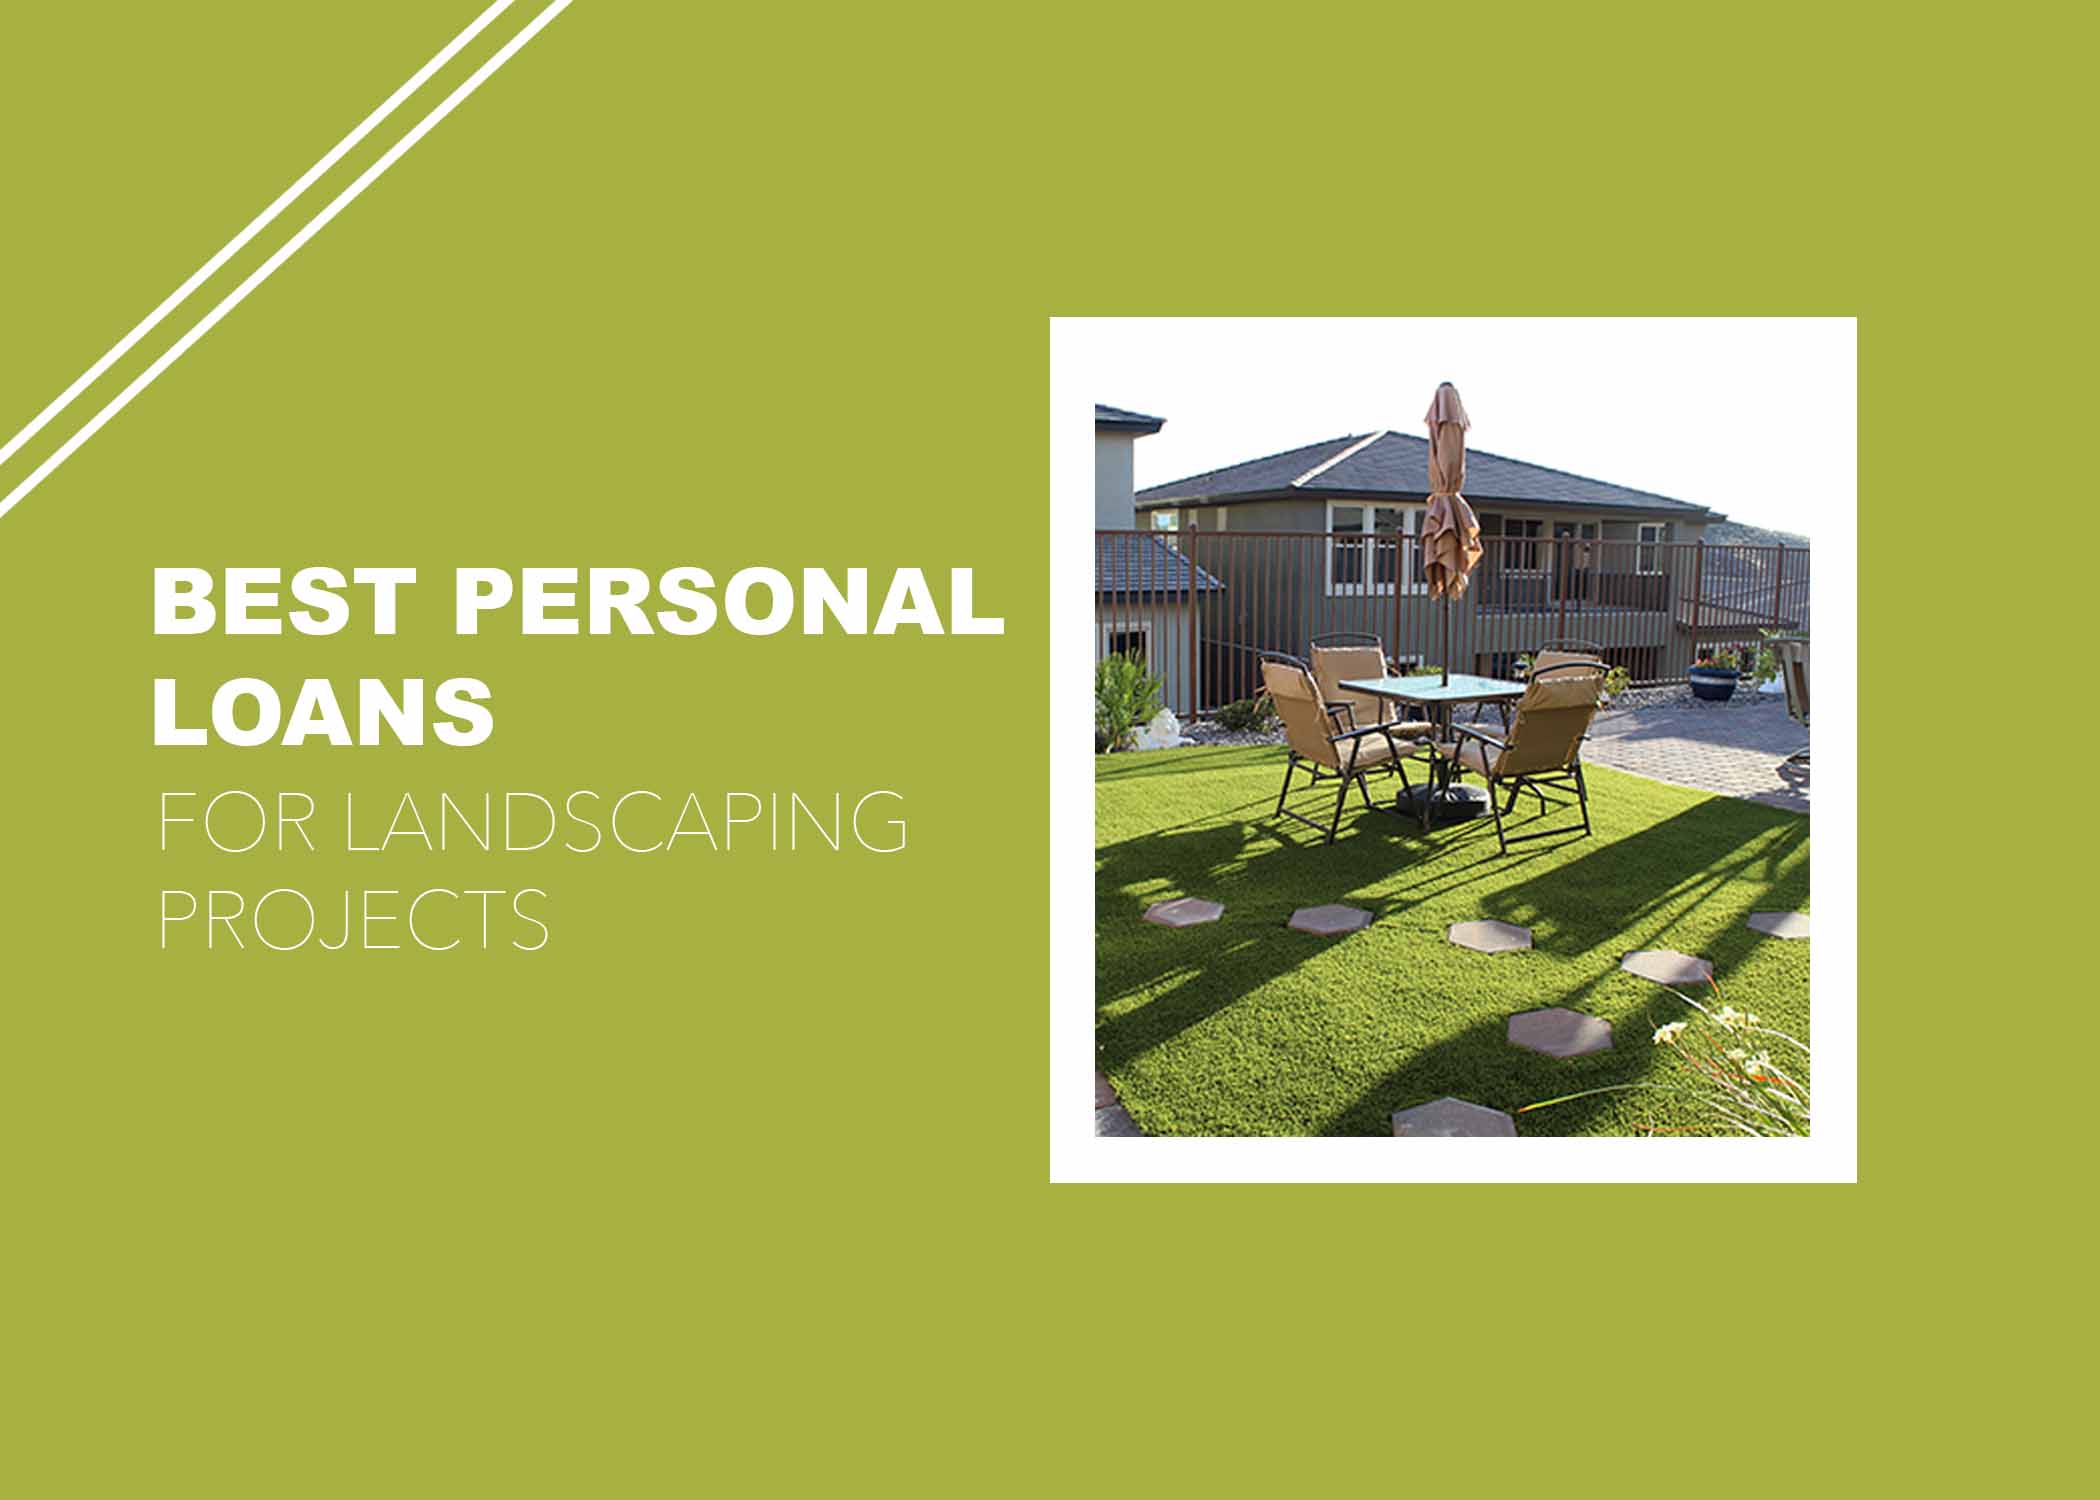 Best Personal Loans for Landscaping Projects